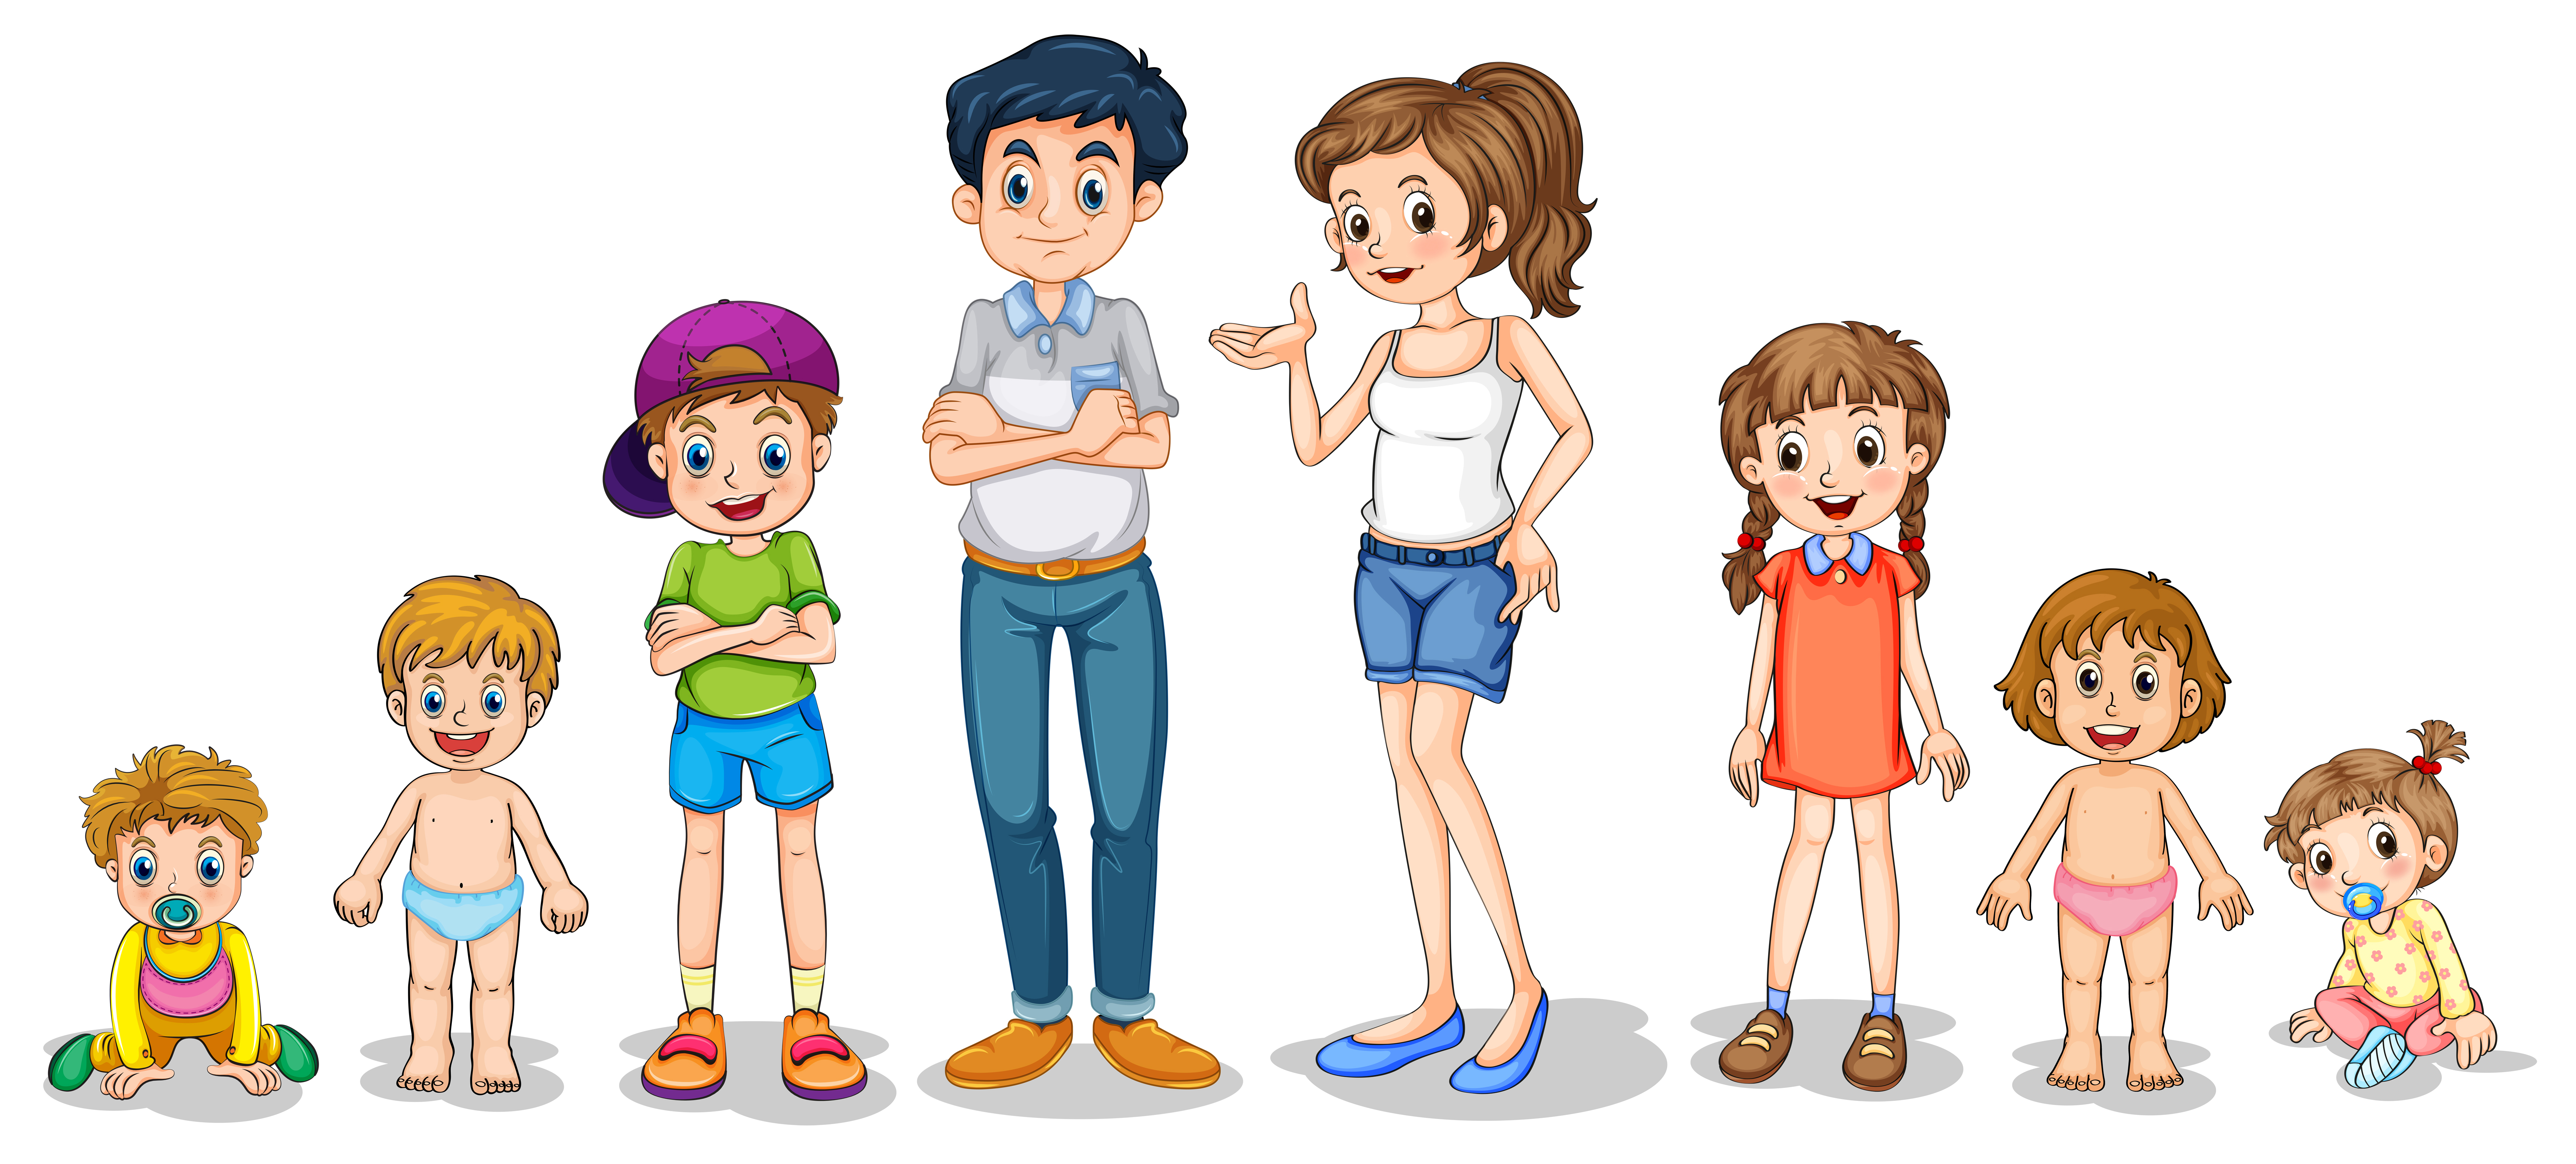 Download Family members - Download Free Vectors, Clipart Graphics ...